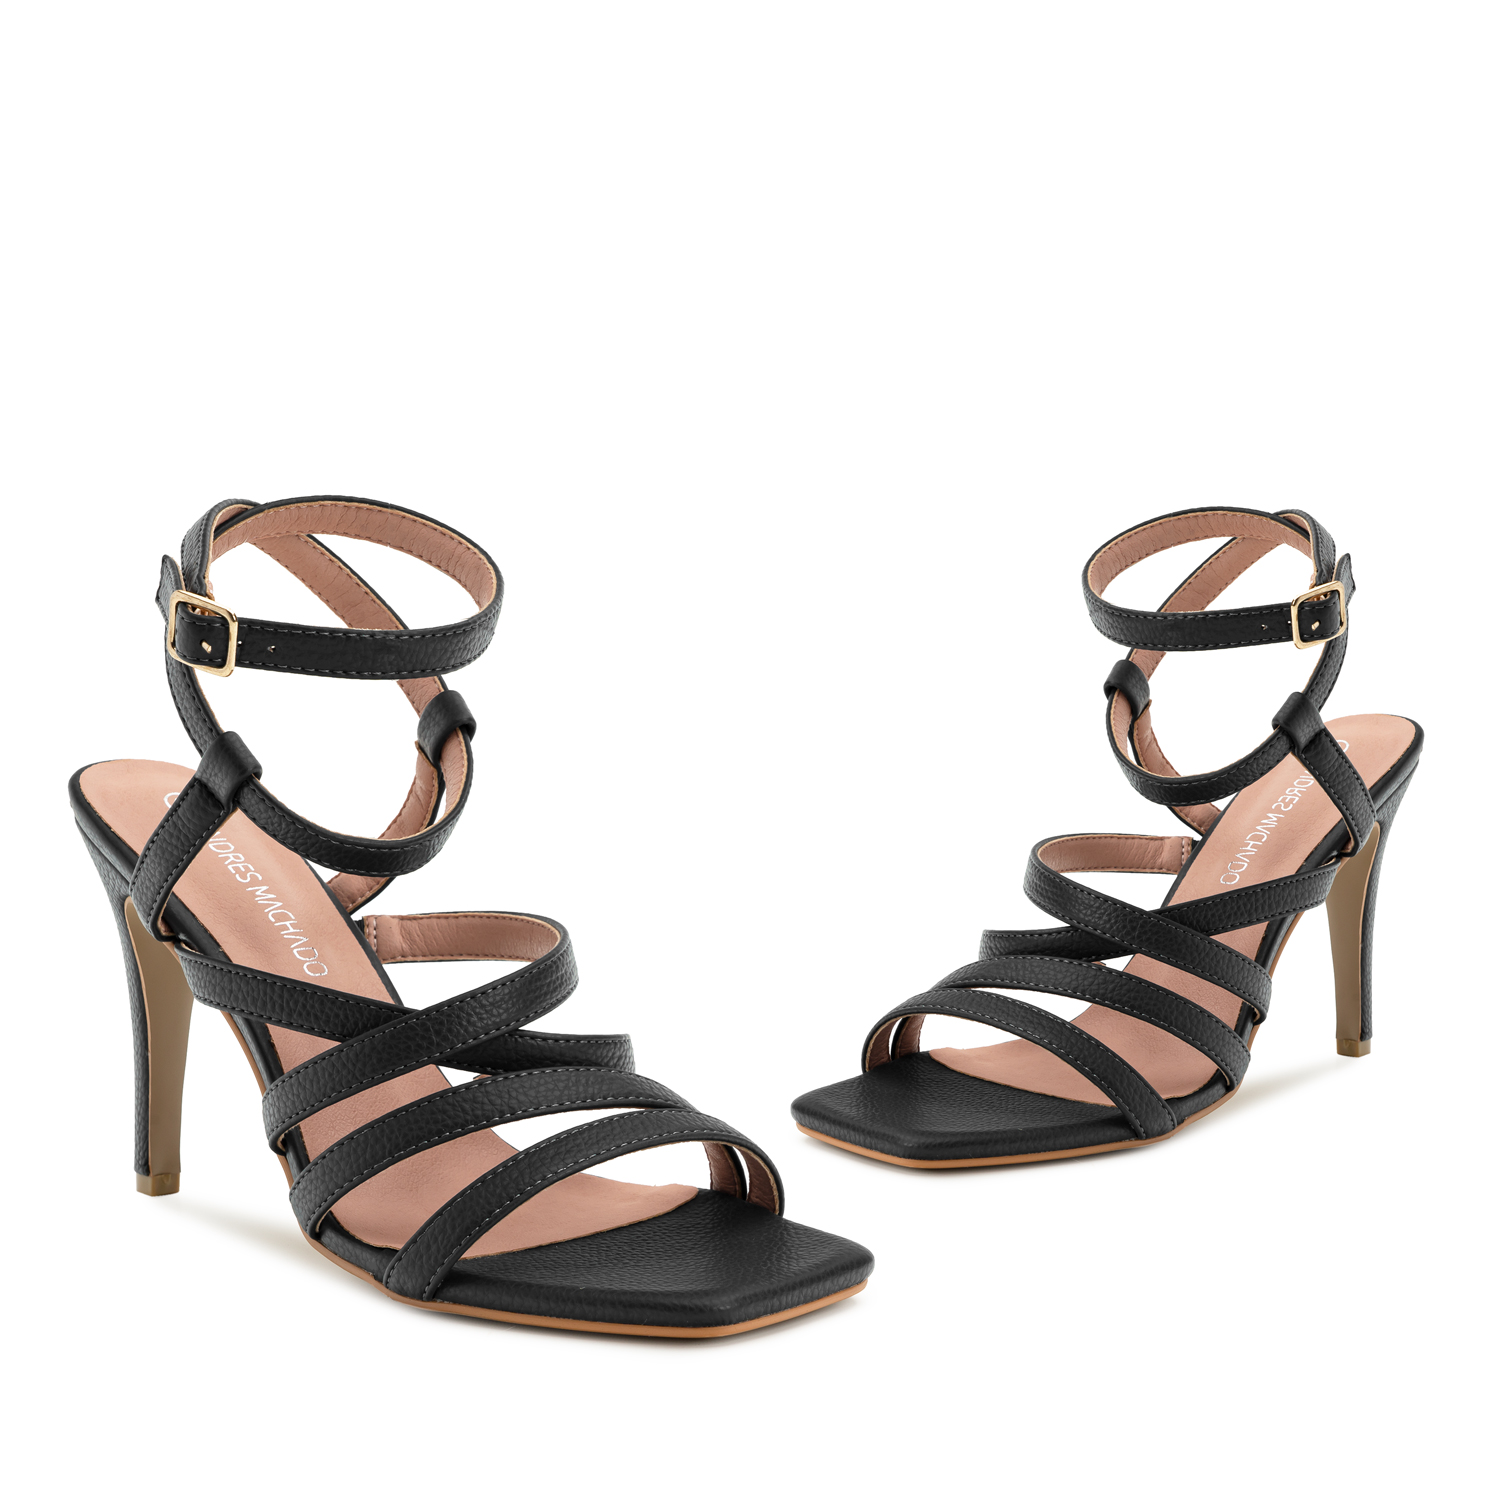 Black Faux Leather Strappy Sandals 